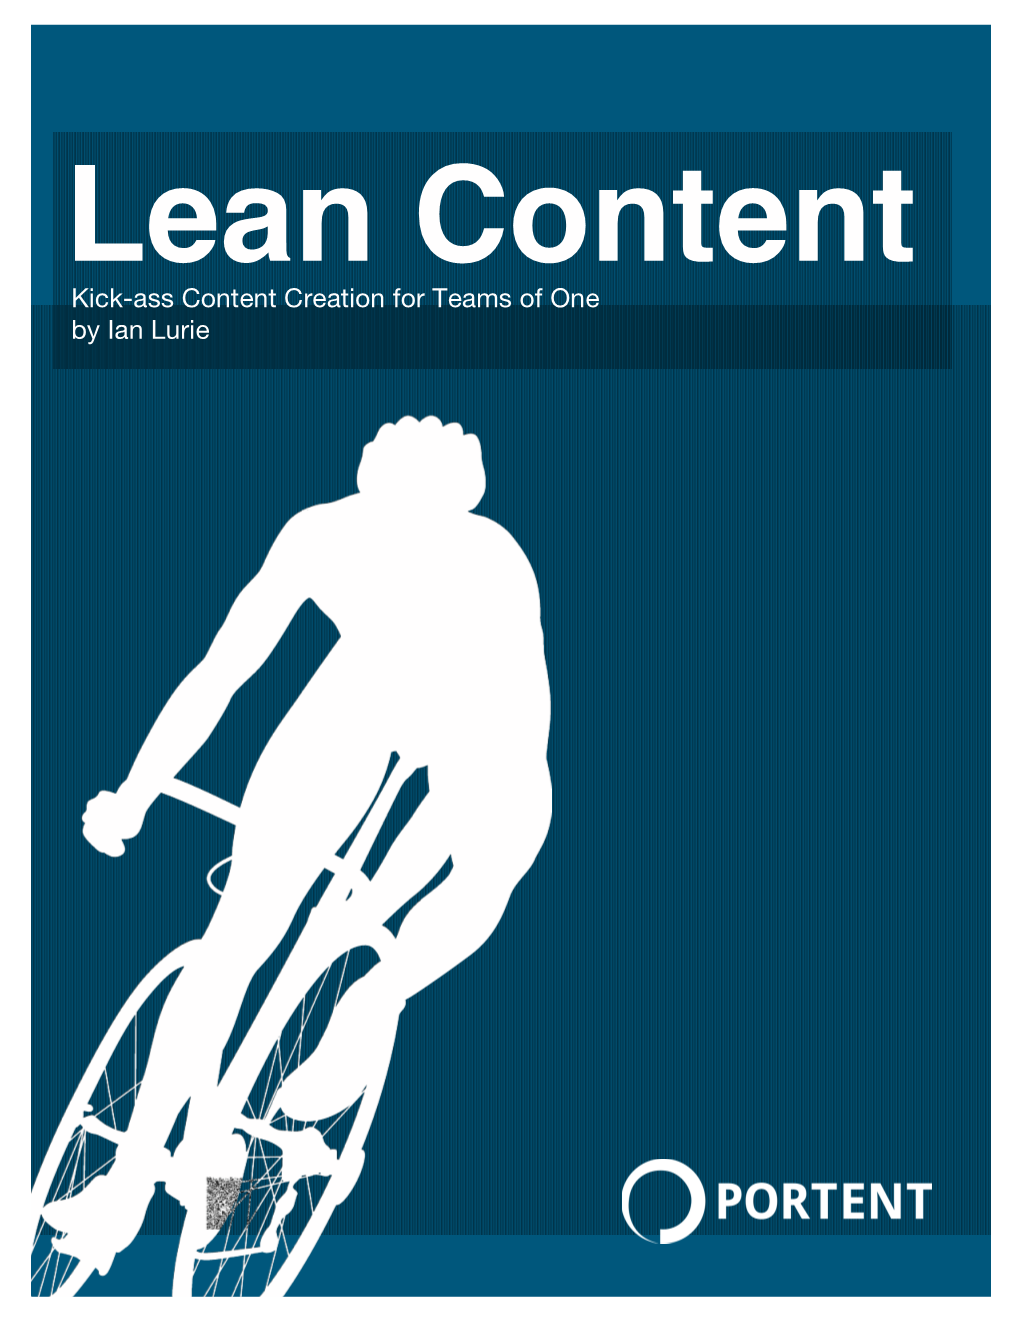 Lean Content Kick-Ass Content Creation for Teams of One by Ian Lurie